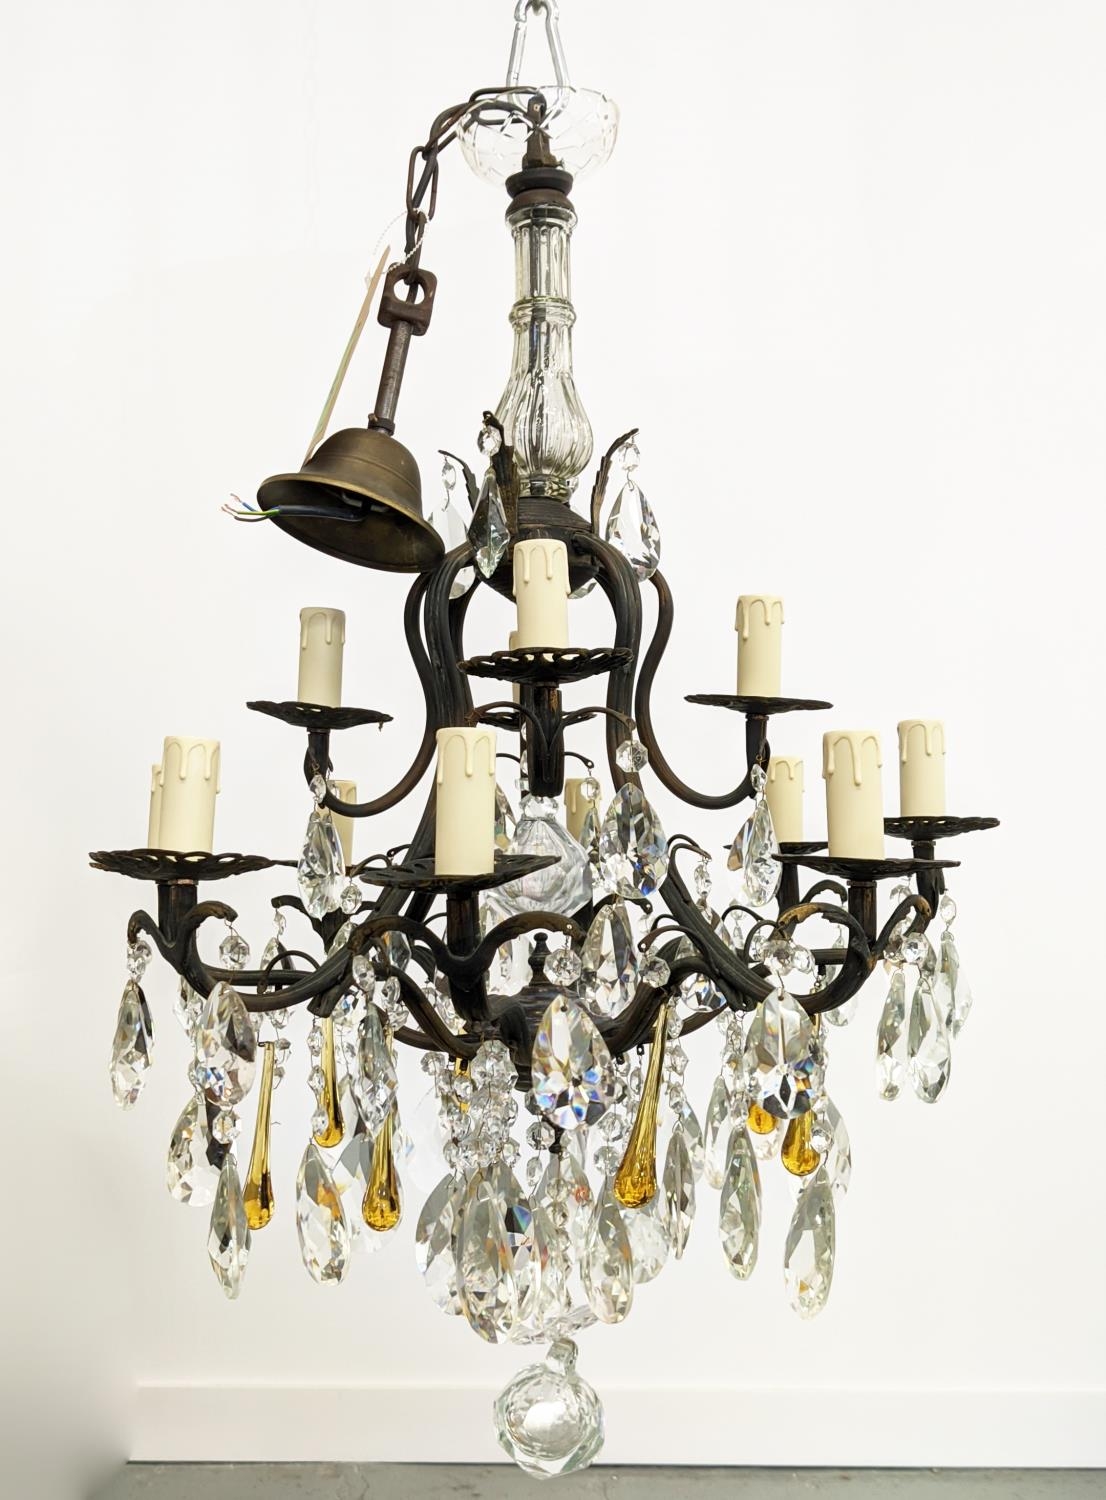 CHANDELIER, similar to previous lot fitted with twelve lights, 50cm W x 110cm H, including chain. - Image 2 of 14